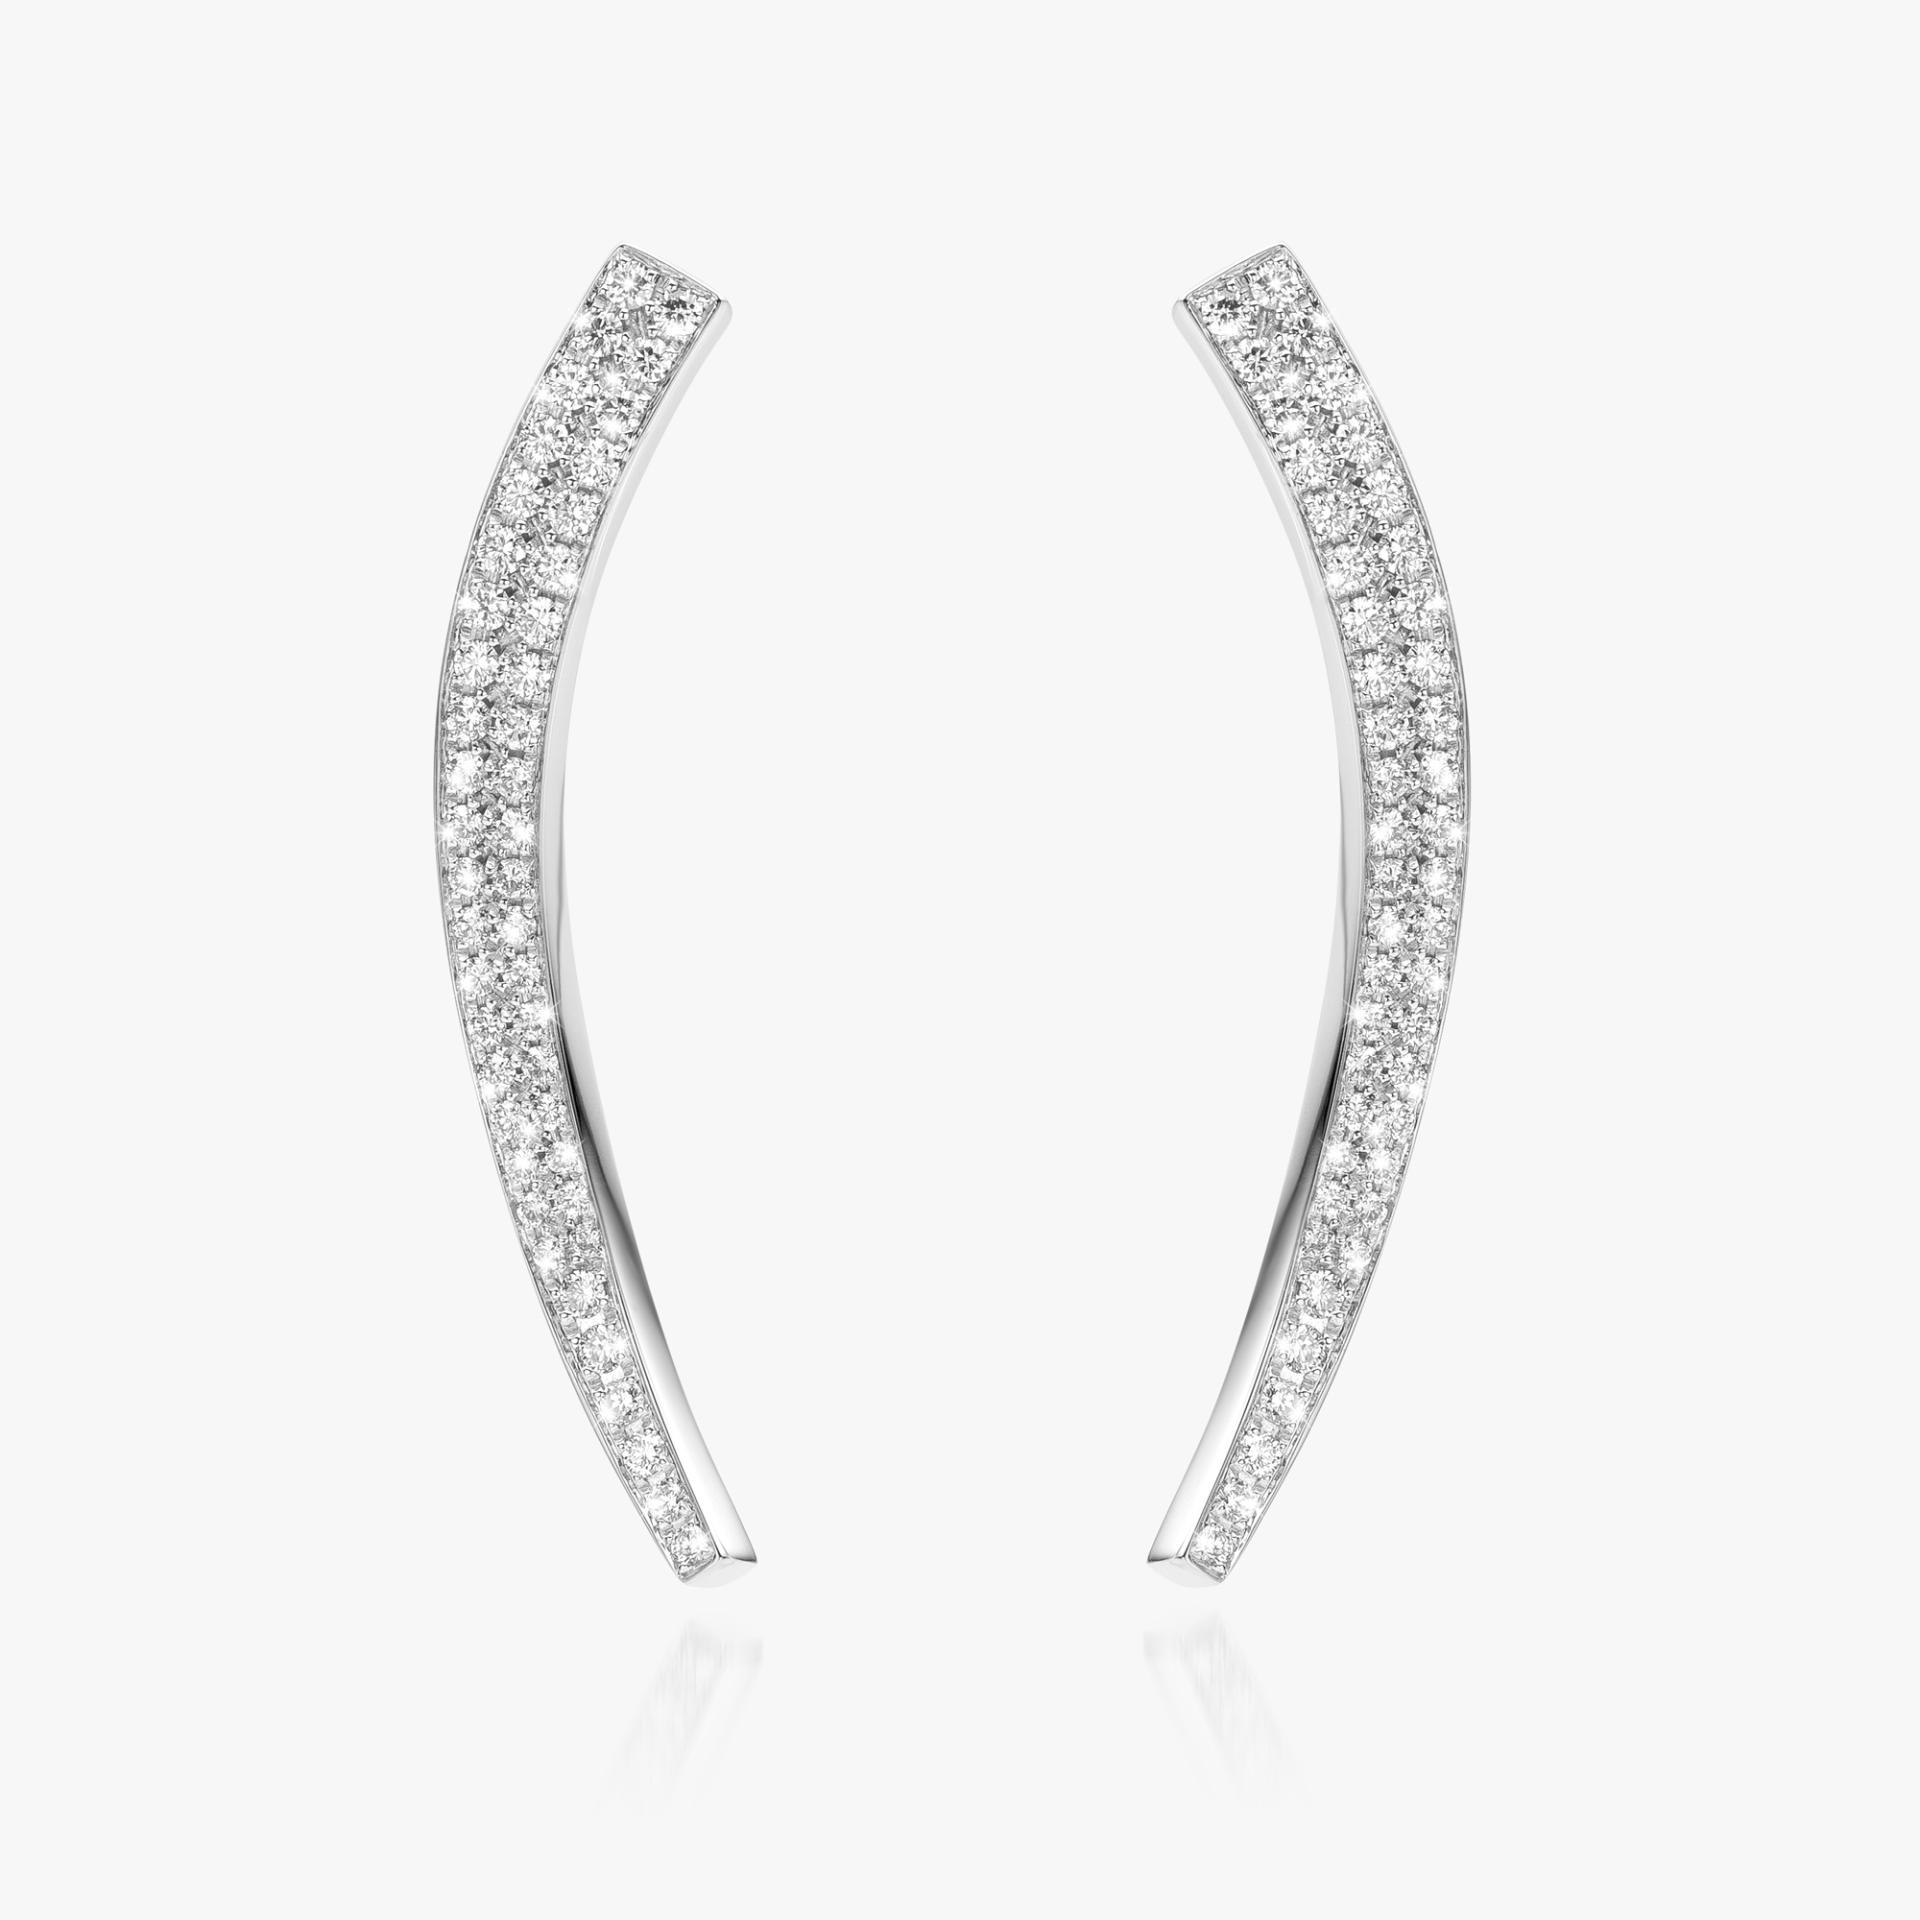 Assymetrical white and rose gold earrings set with brilliant cut diamonds made by Maison De Greef